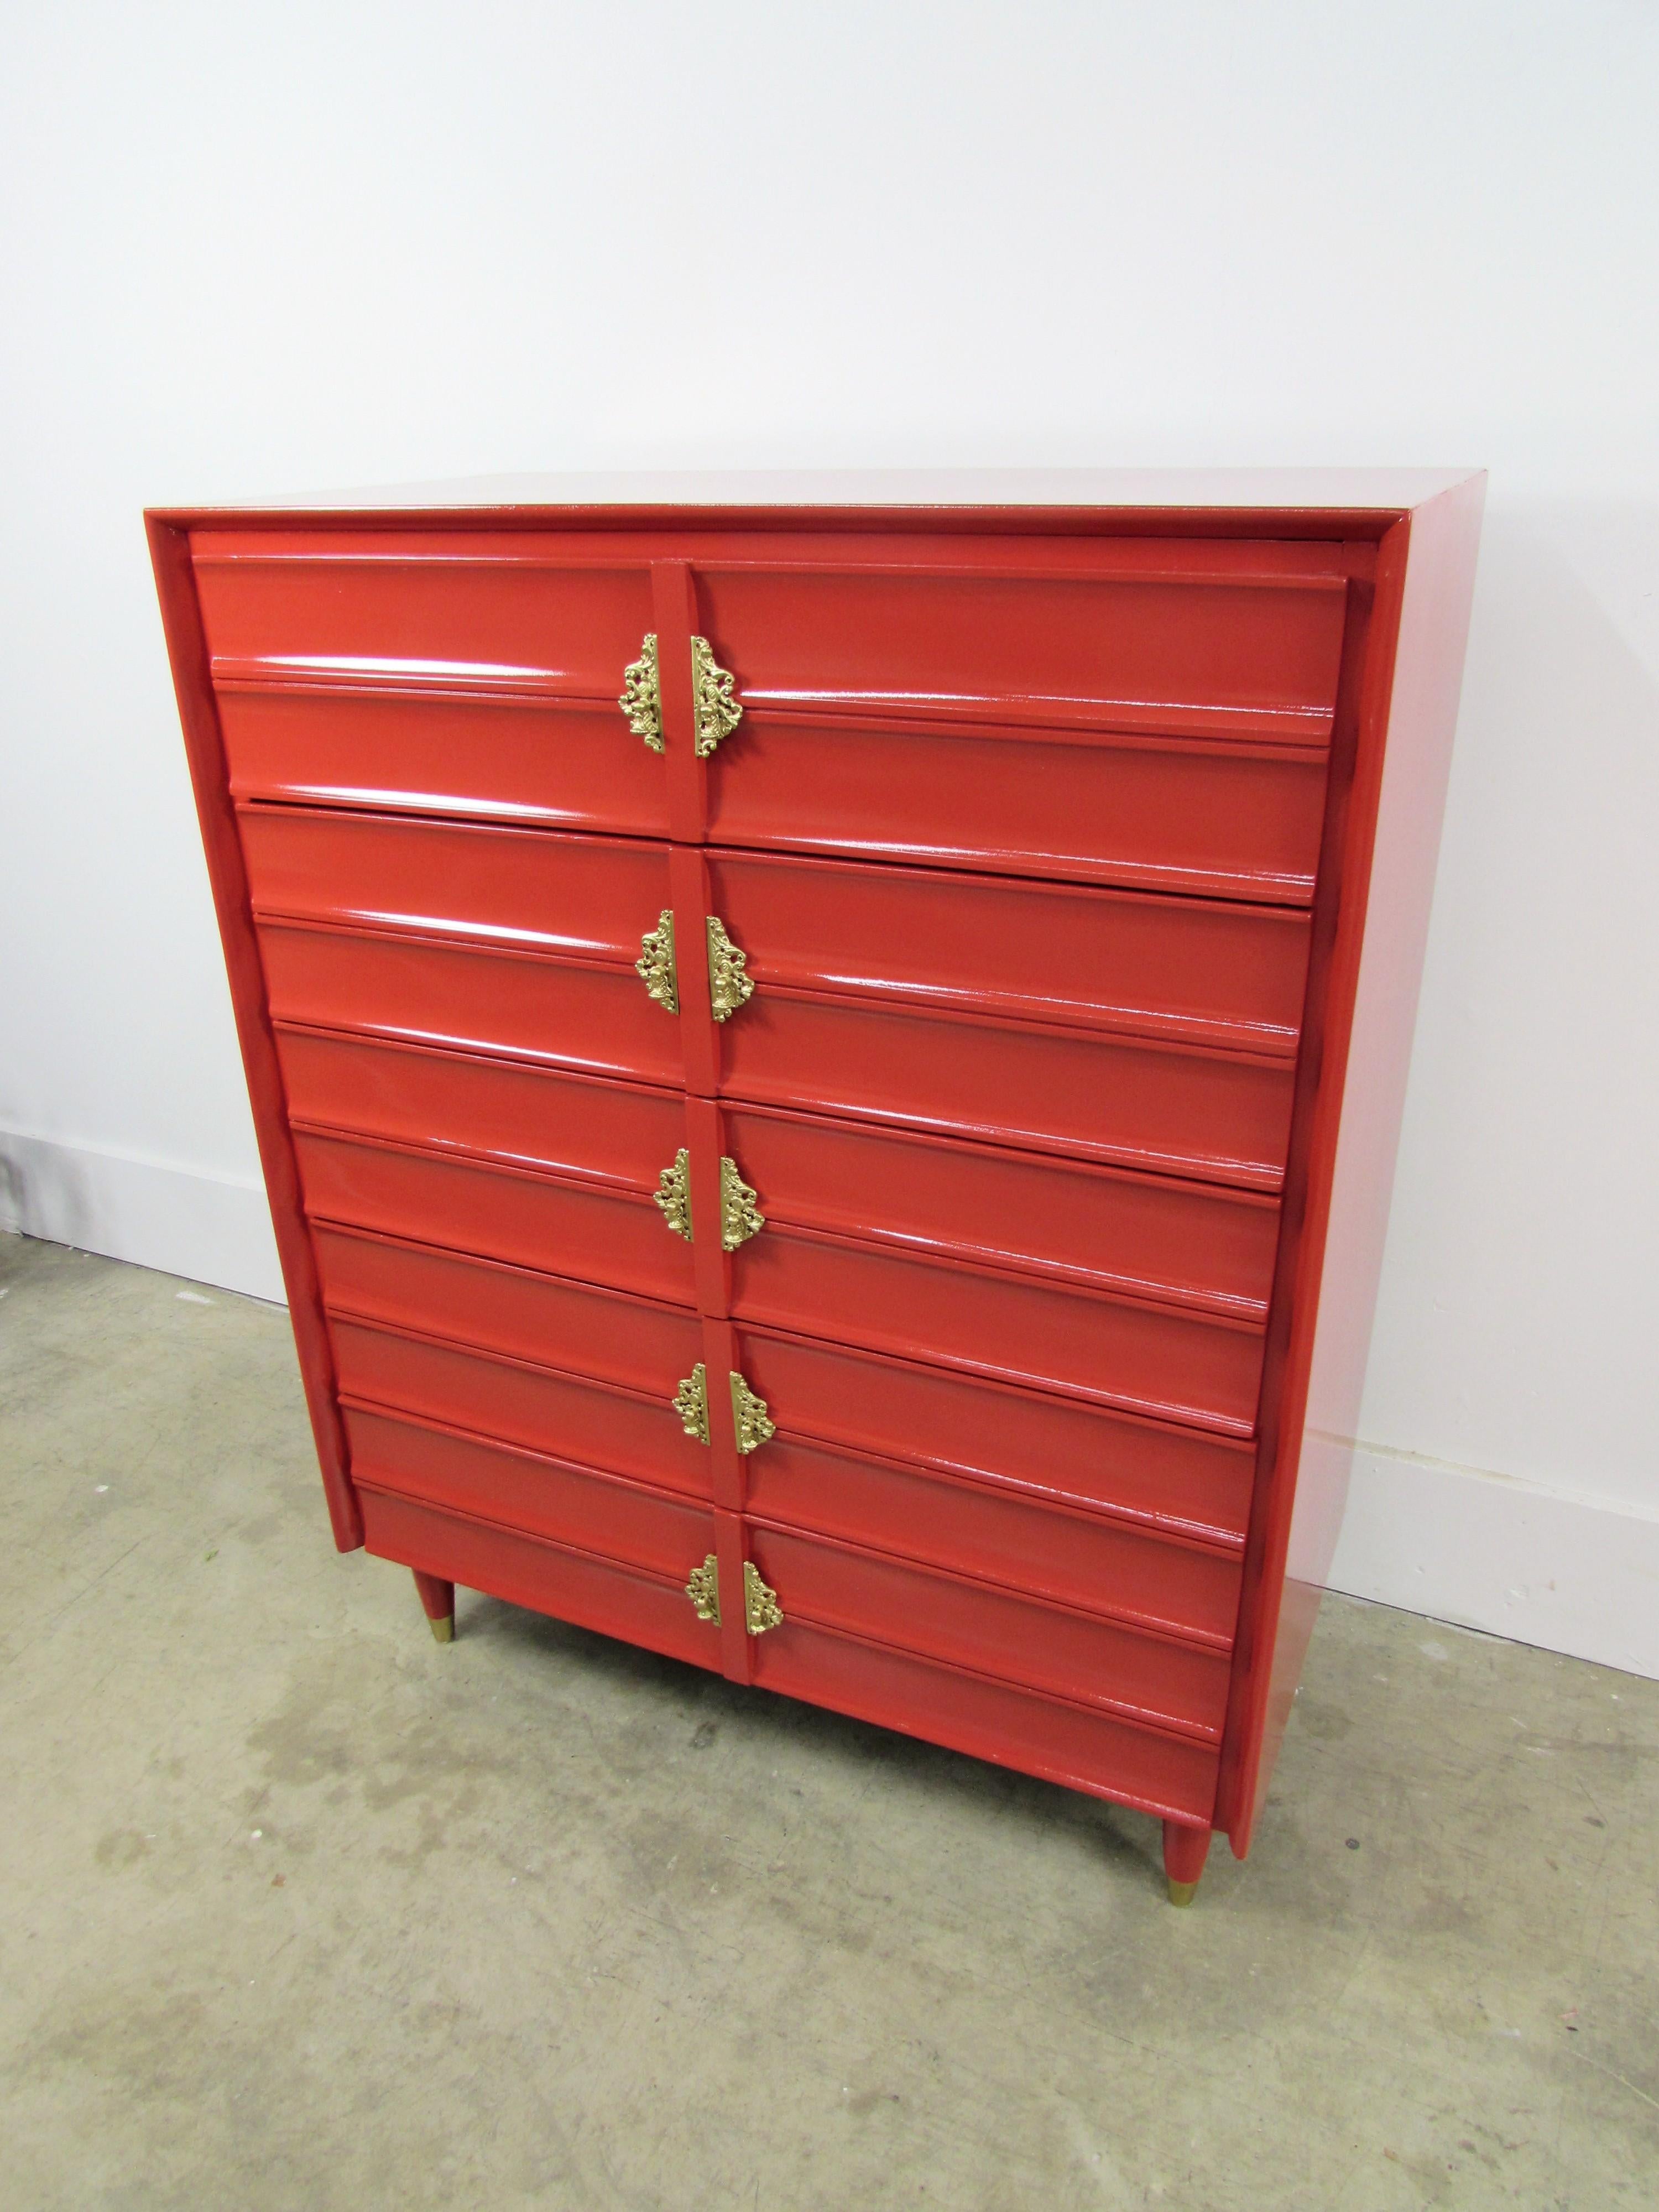 Hungerford Rave Red Lacquered Five-Drawer Chest In Excellent Condition For Sale In Raleigh, NC